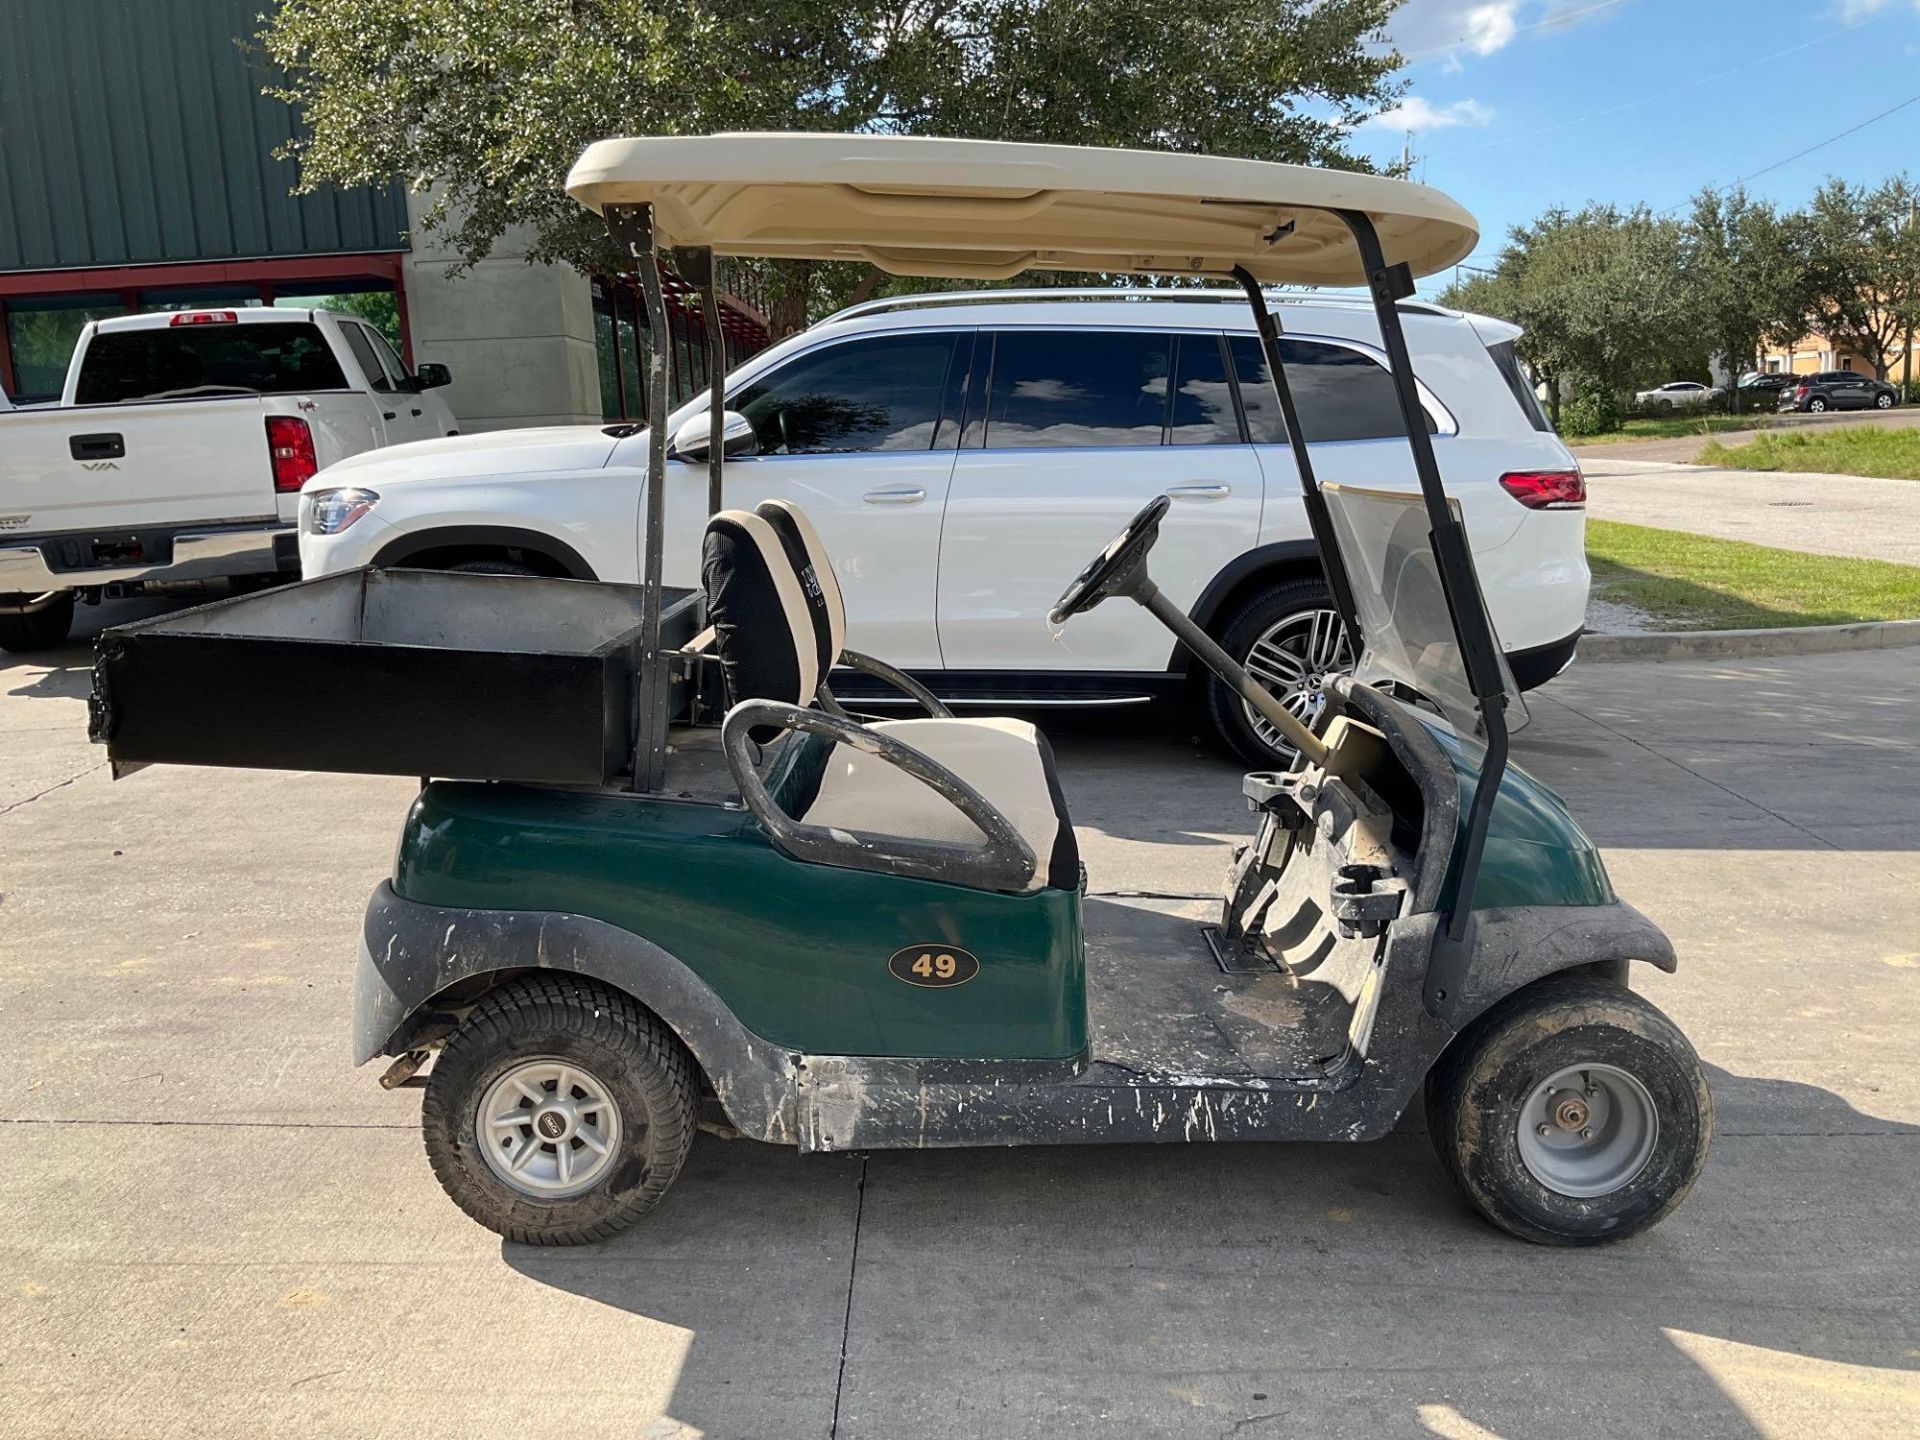 CLUB CAR GOLF CART, ELECTRIC, 48 VOLTS, UTILITY BED ATTACHED APPROX 42” W x 30” L , BRAND NEW BATTER - Image 6 of 11